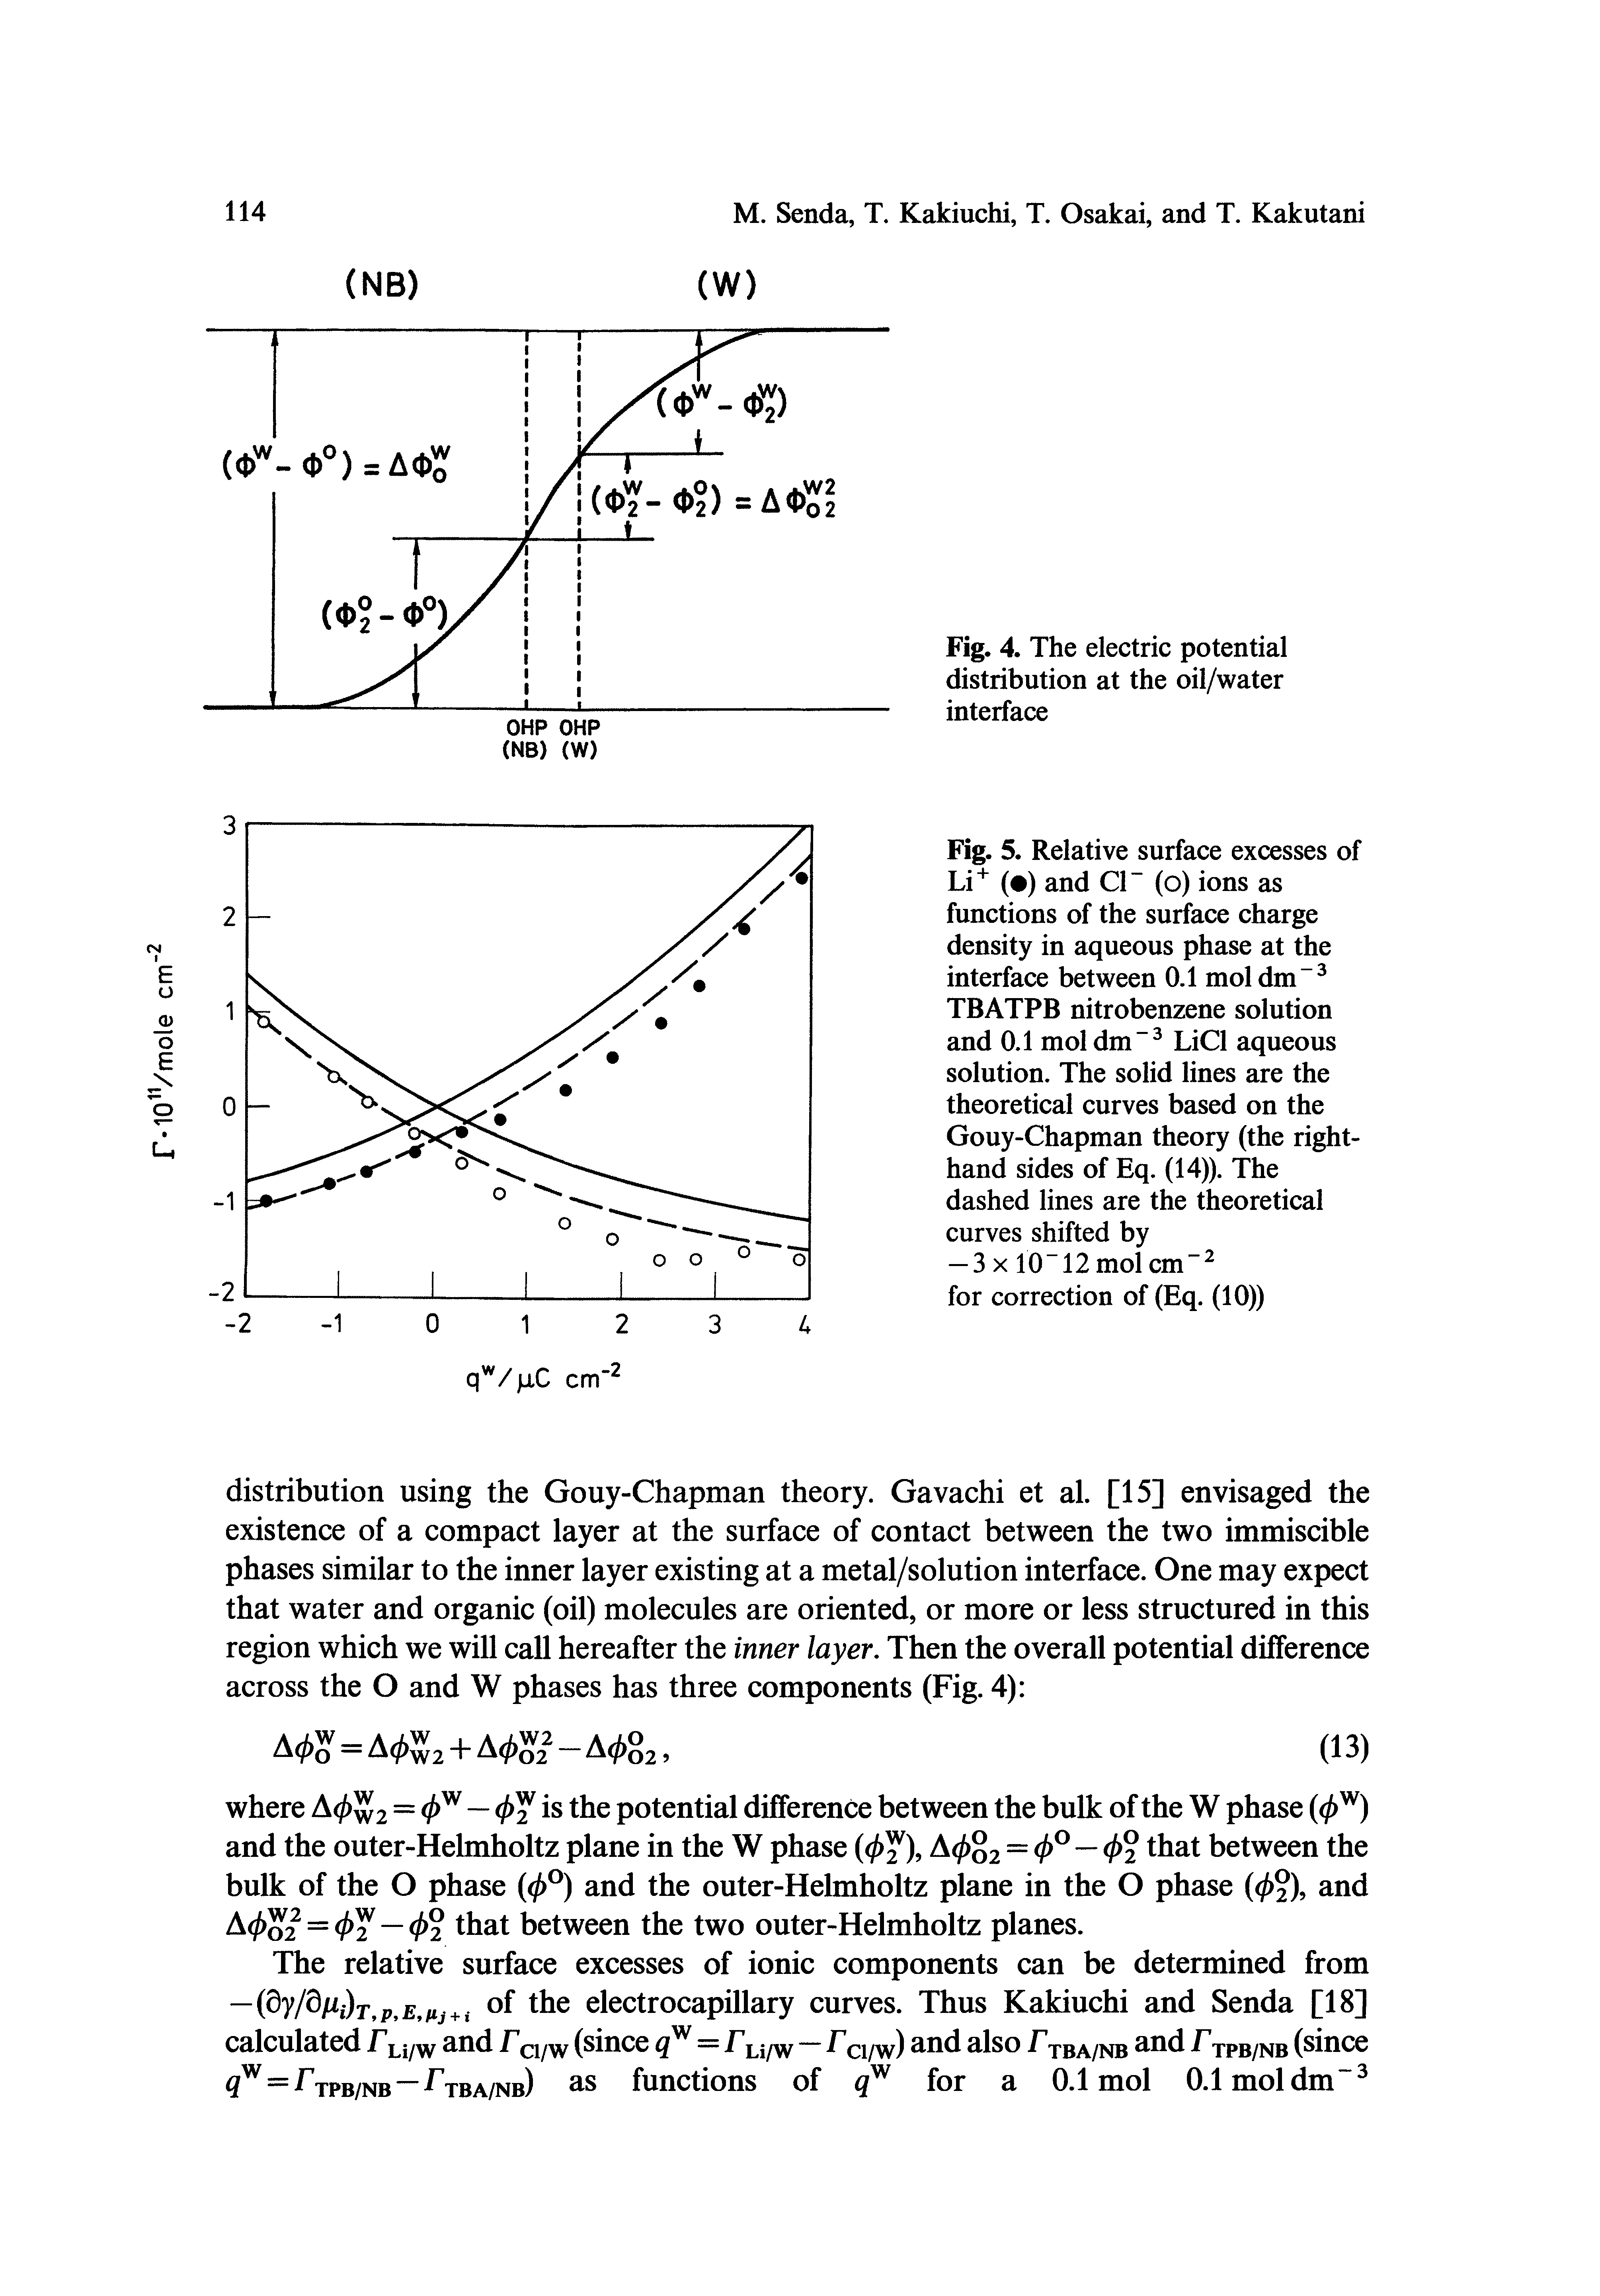 Fig. 5. Relative surface excesses of Li ( ) and Cl (o) ions as functions of the surface charge density in aqueous phase at the interface between 0.1 mol dm TBATPB nitrobenzene solution and 0.1 mol dm LiCl aqueous solution. The solid lines are the theoretical curves based on the Gouy-Chapman theory (the right-hand sides of Eq. (14)). The dashed lines are the theoretical curves shifted by — 3 X 10 12molcm" for correction of (Eq. (10))...